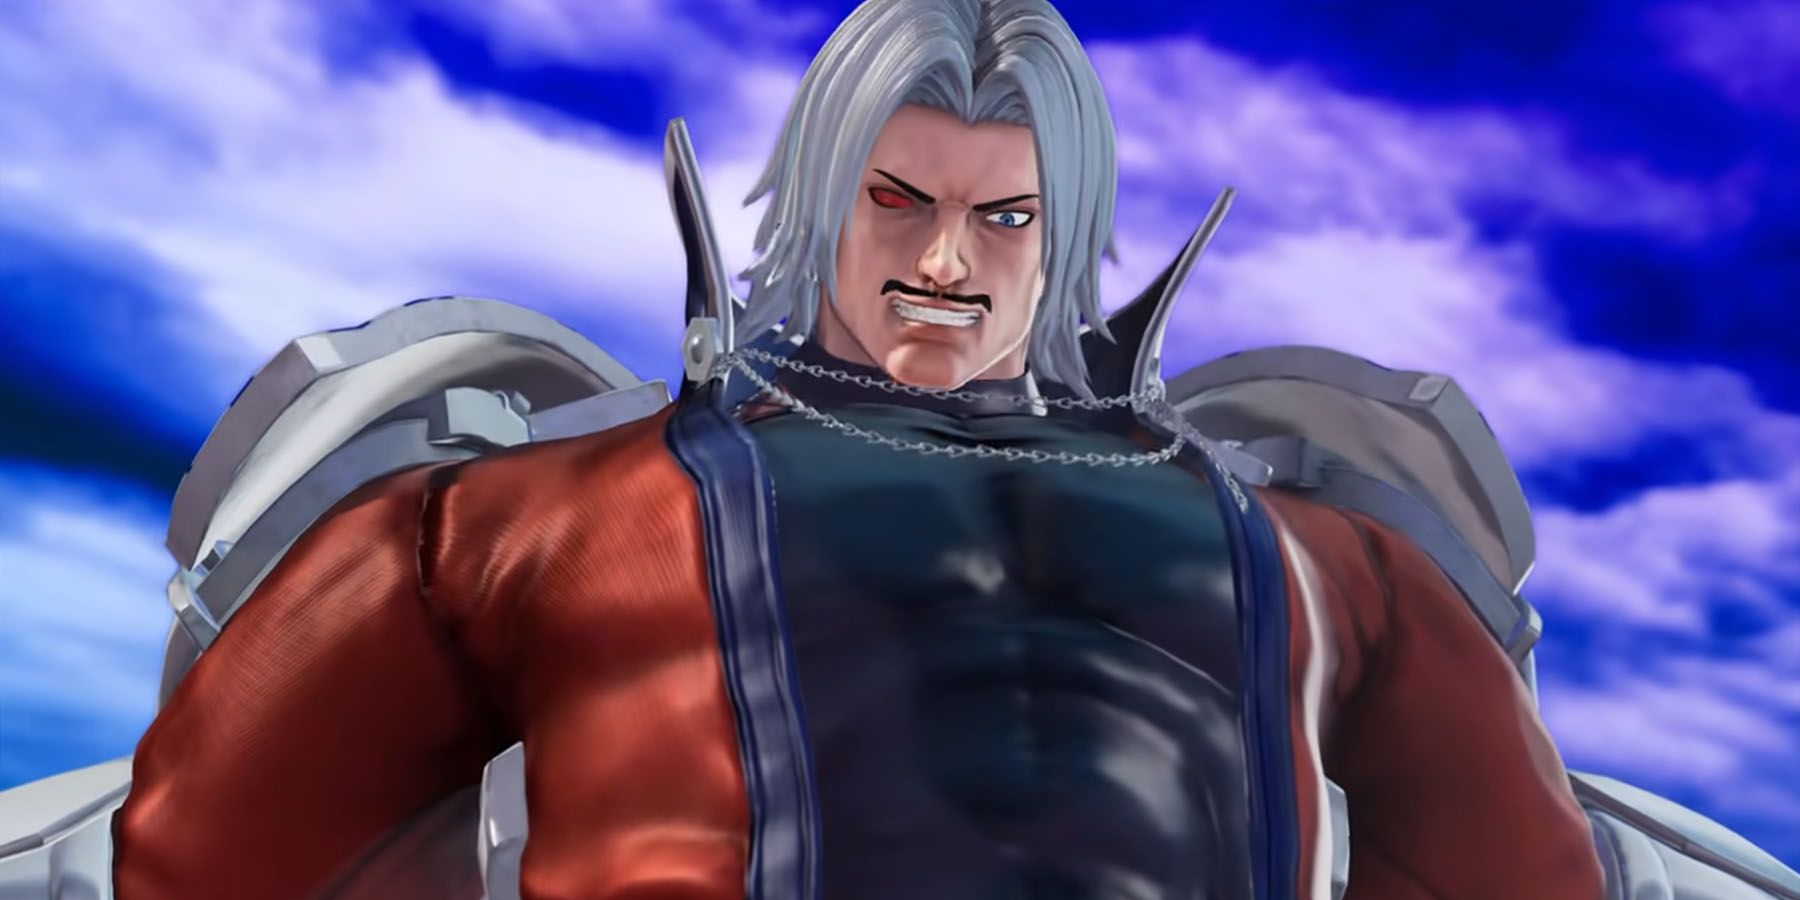 King of Fighters 15 Omega Rugal